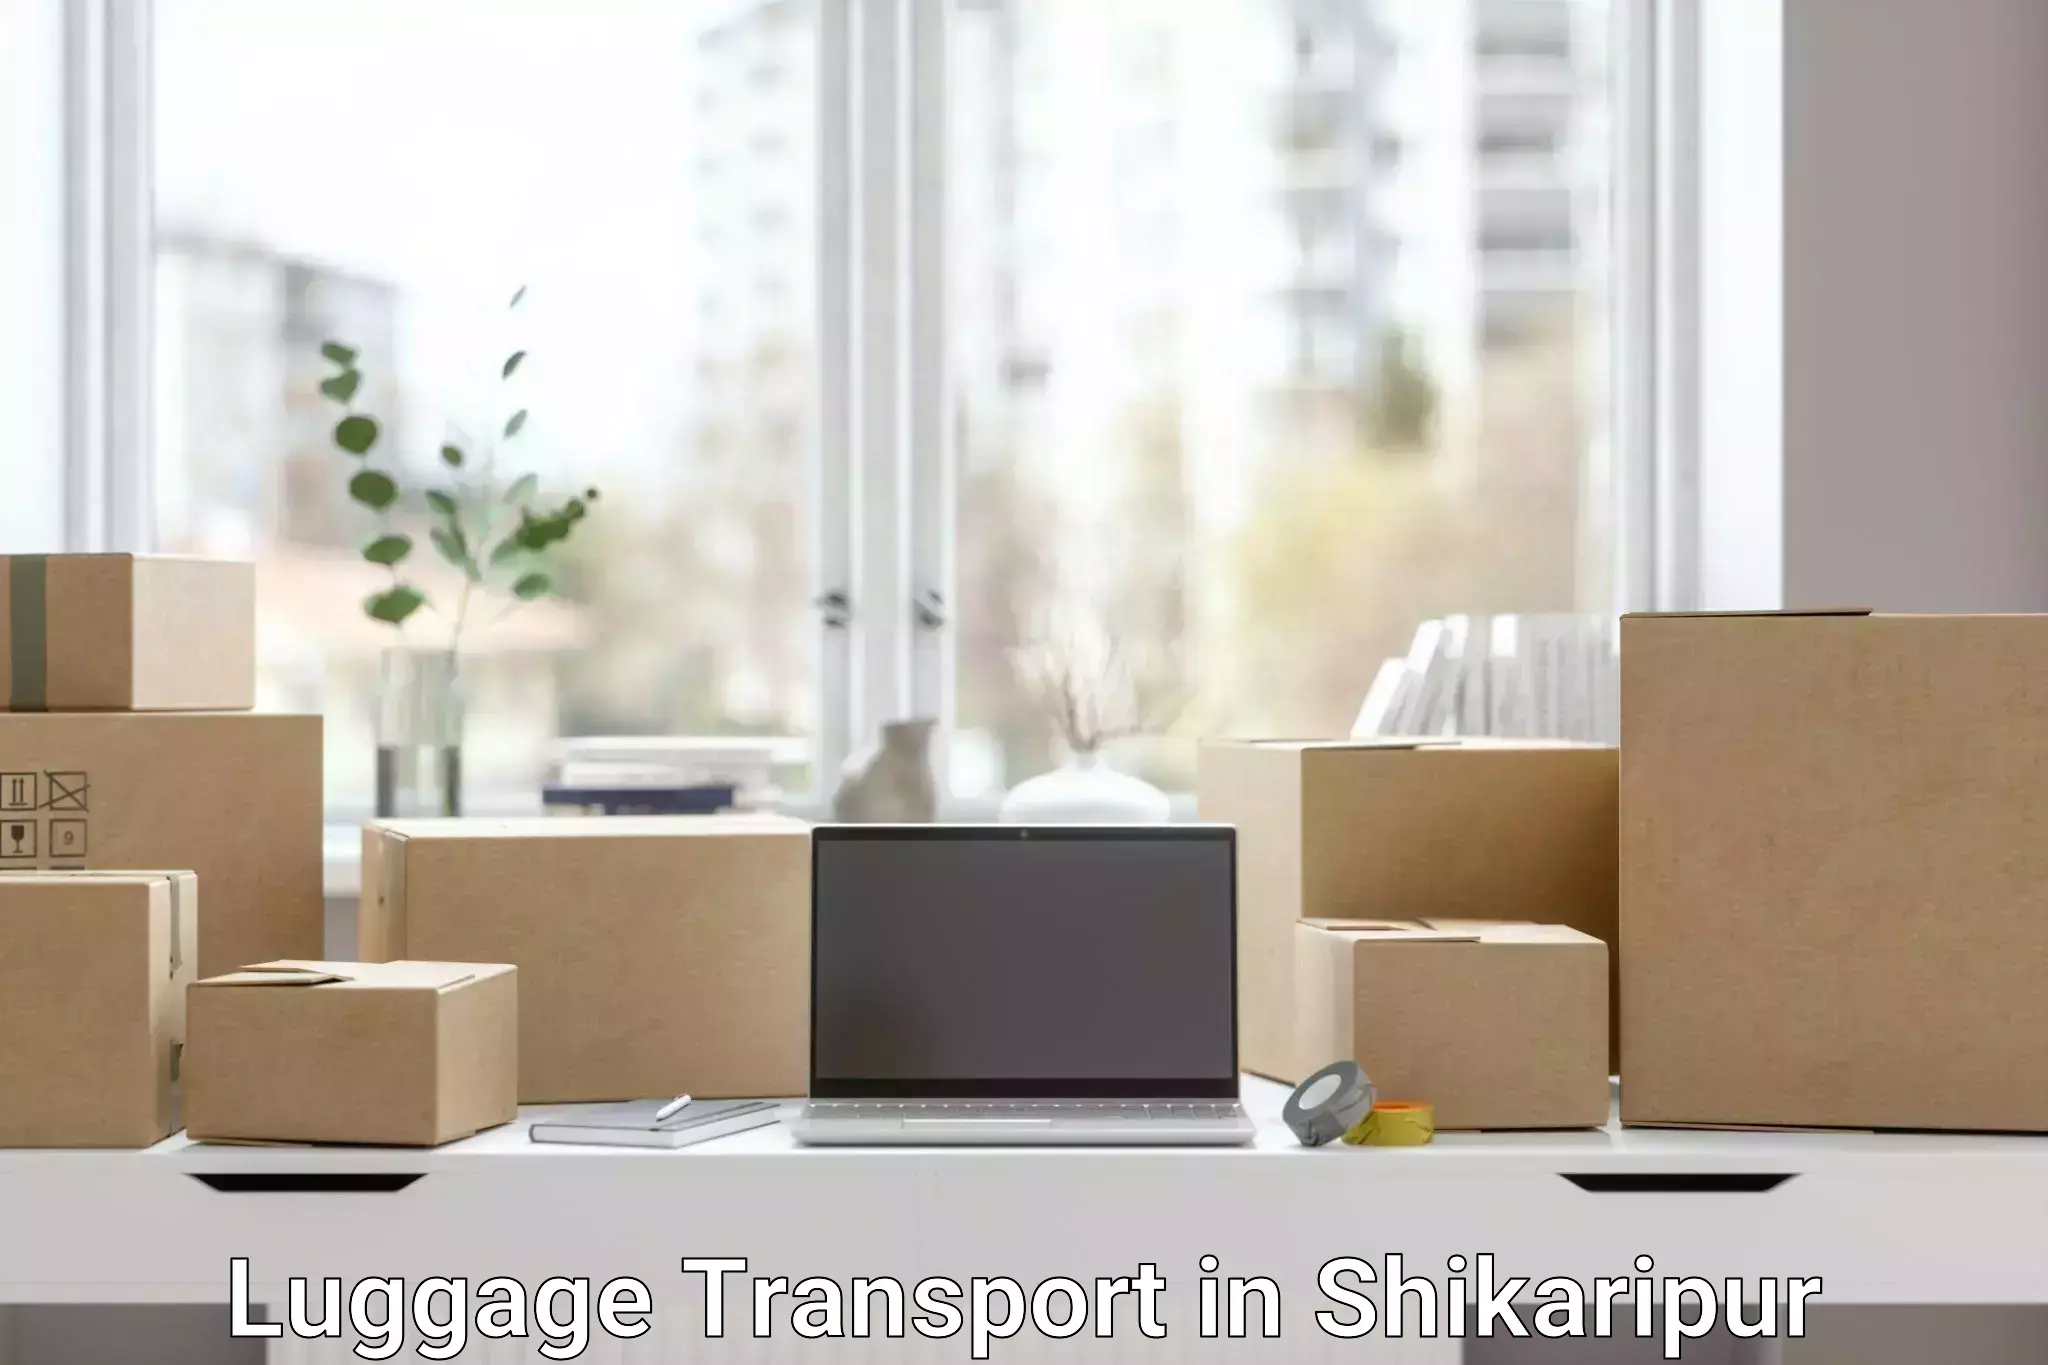 Luggage transport solutions in Shikaripur